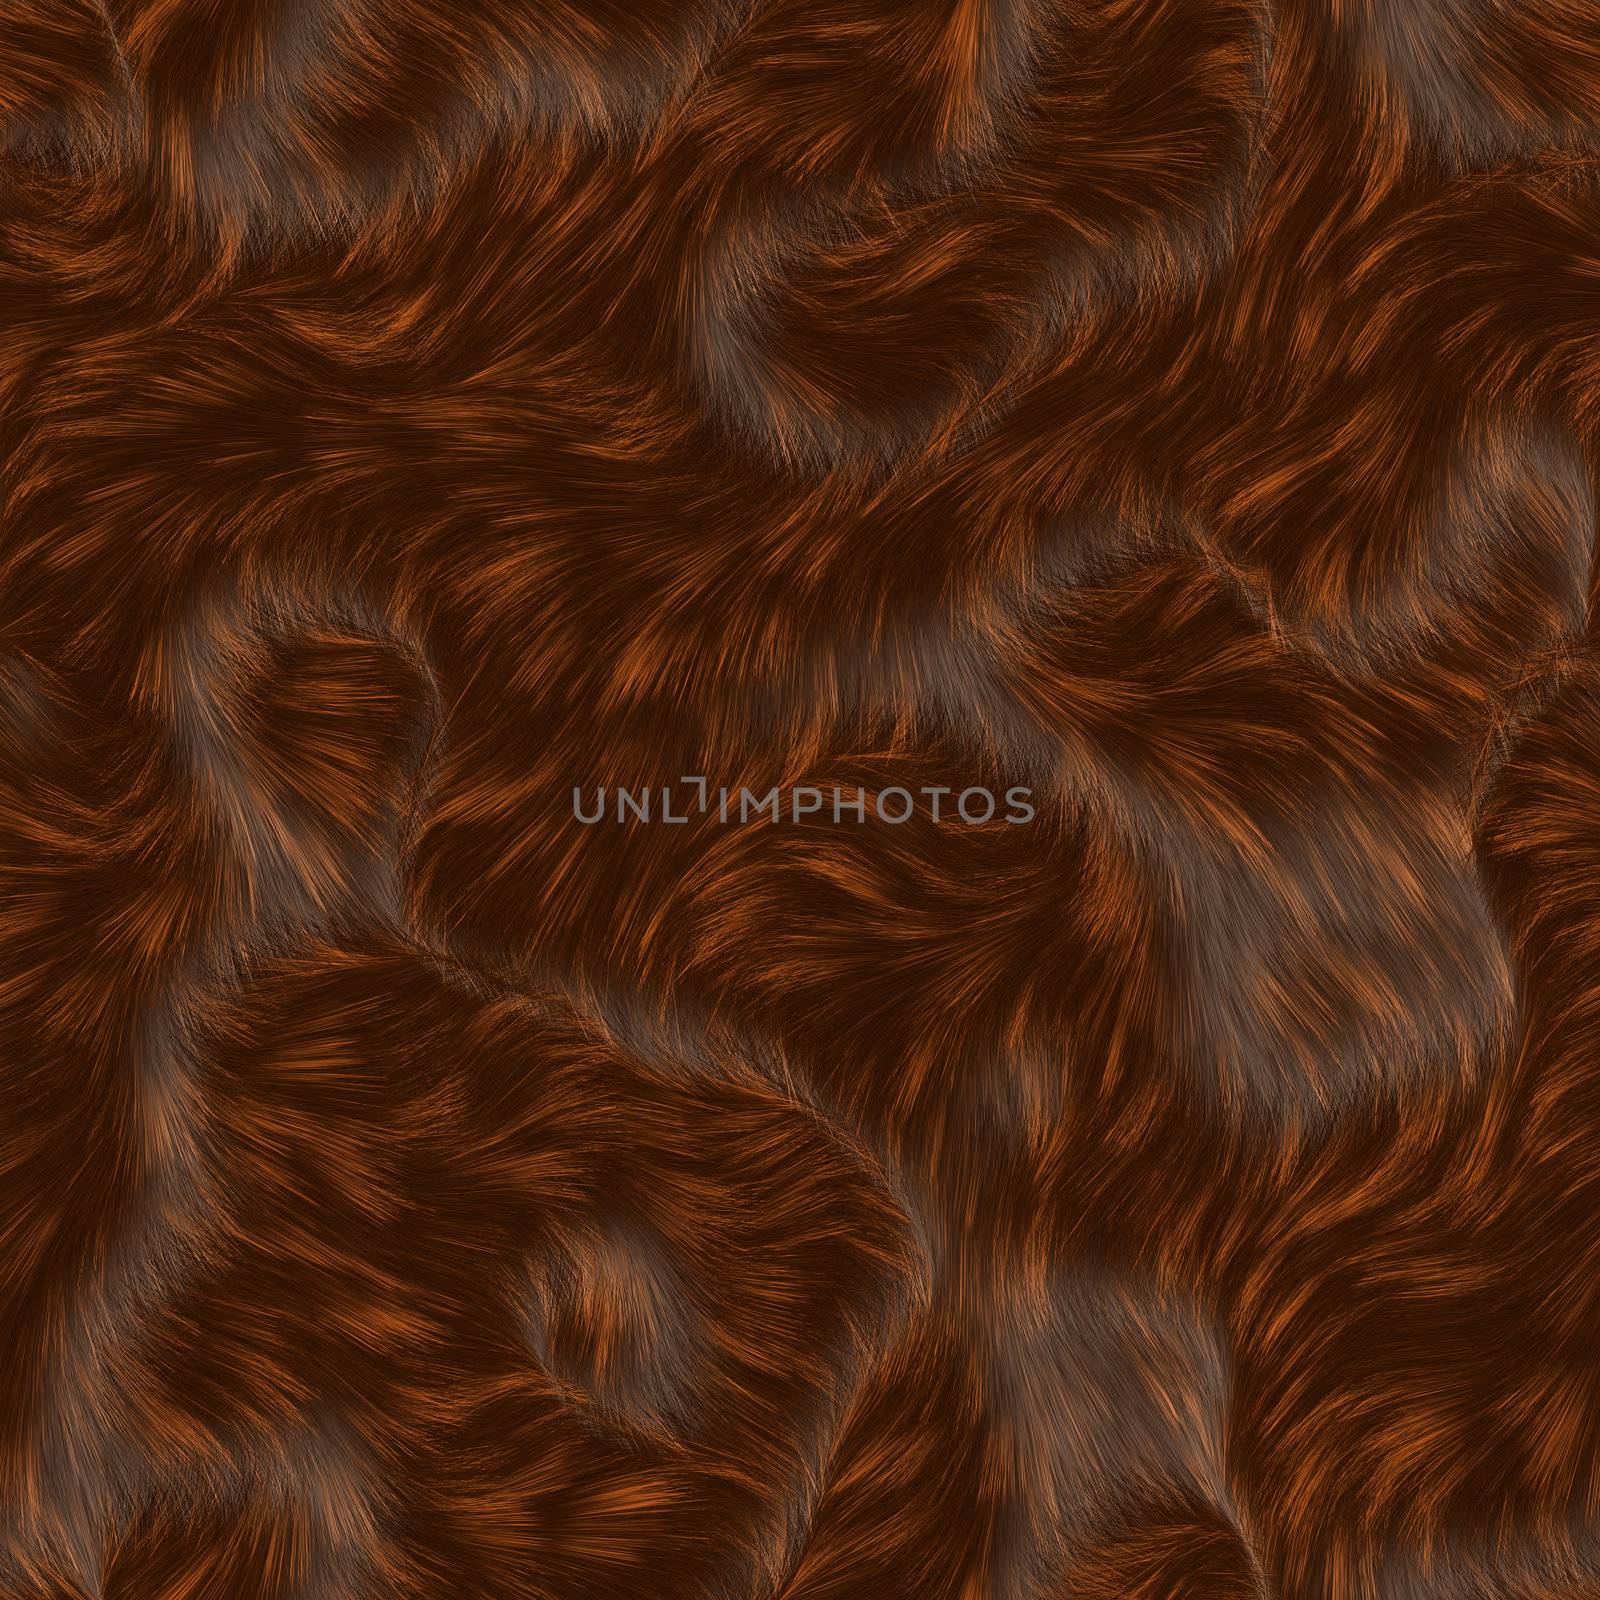 an illustration of long, soft, wavy and luxurious animal fur